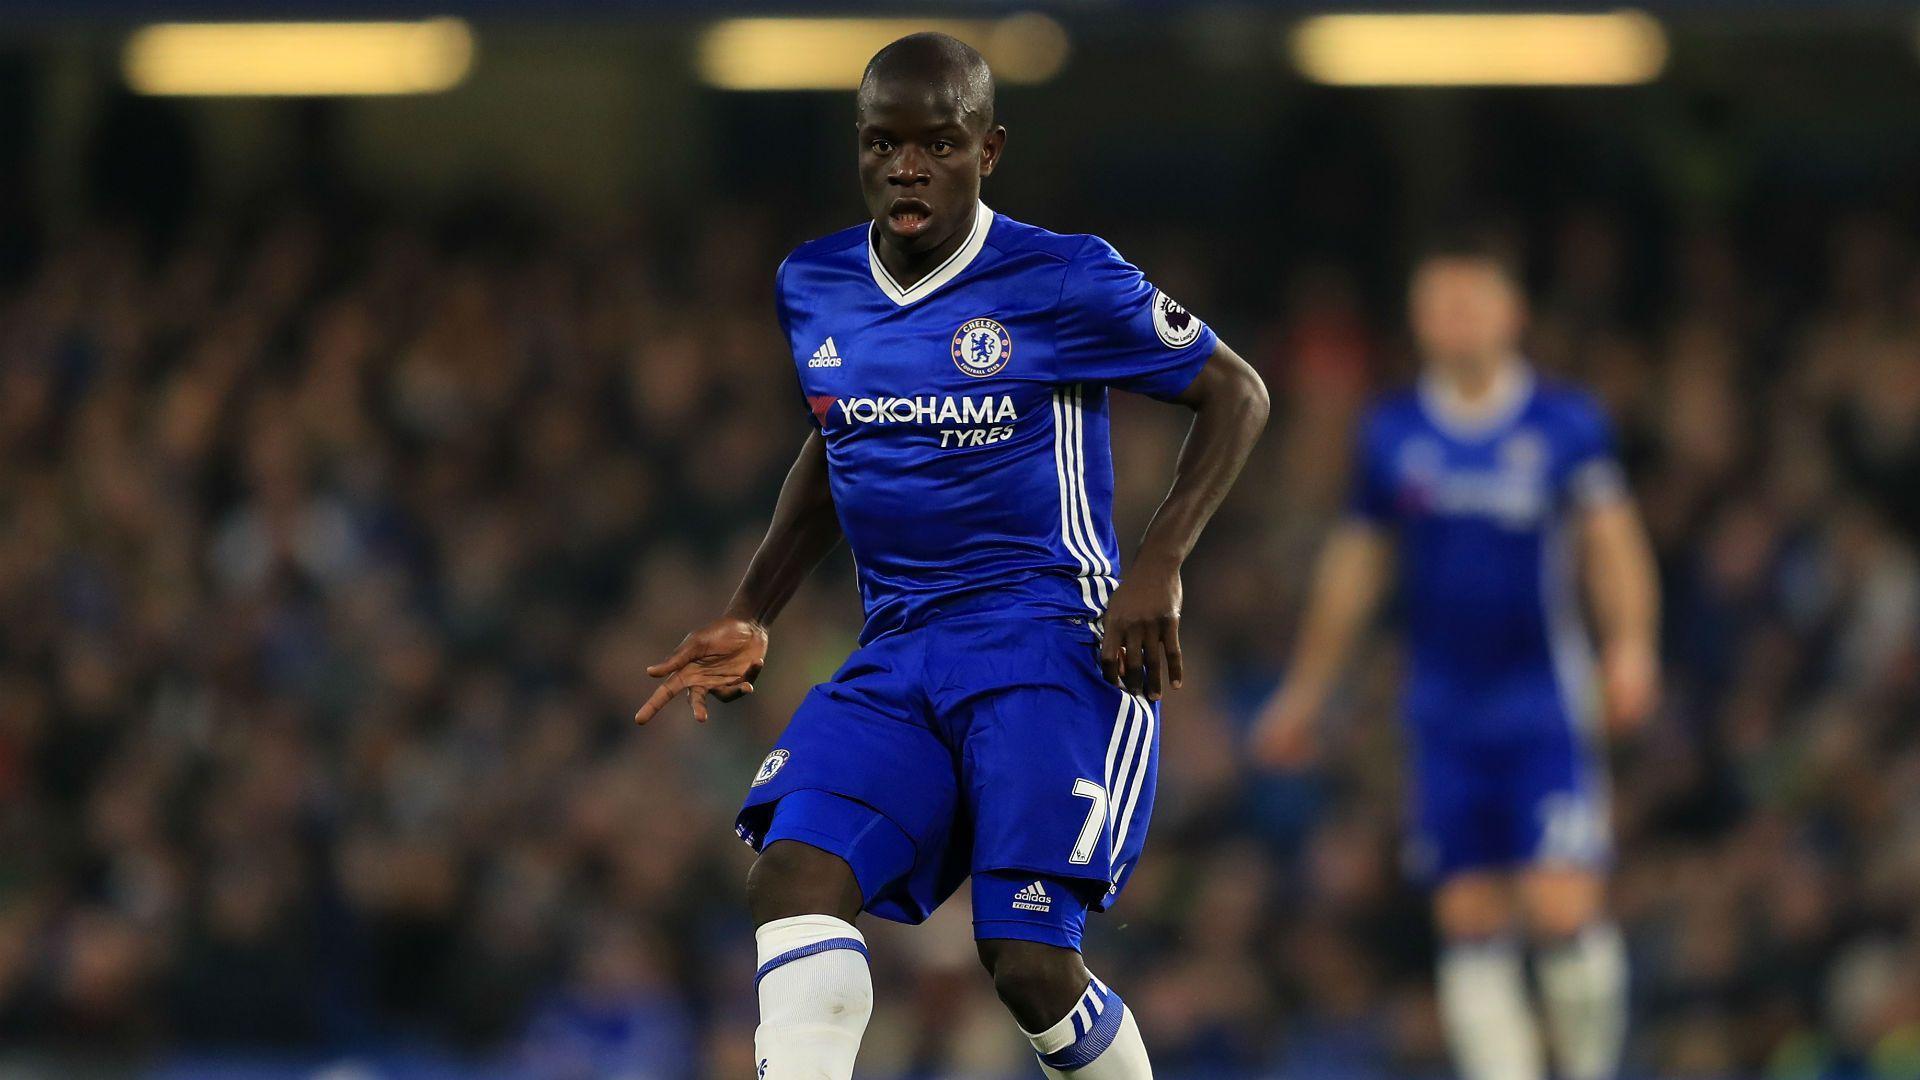 Arsene Wenger reveals he tried to sign N'Golo Kante twice